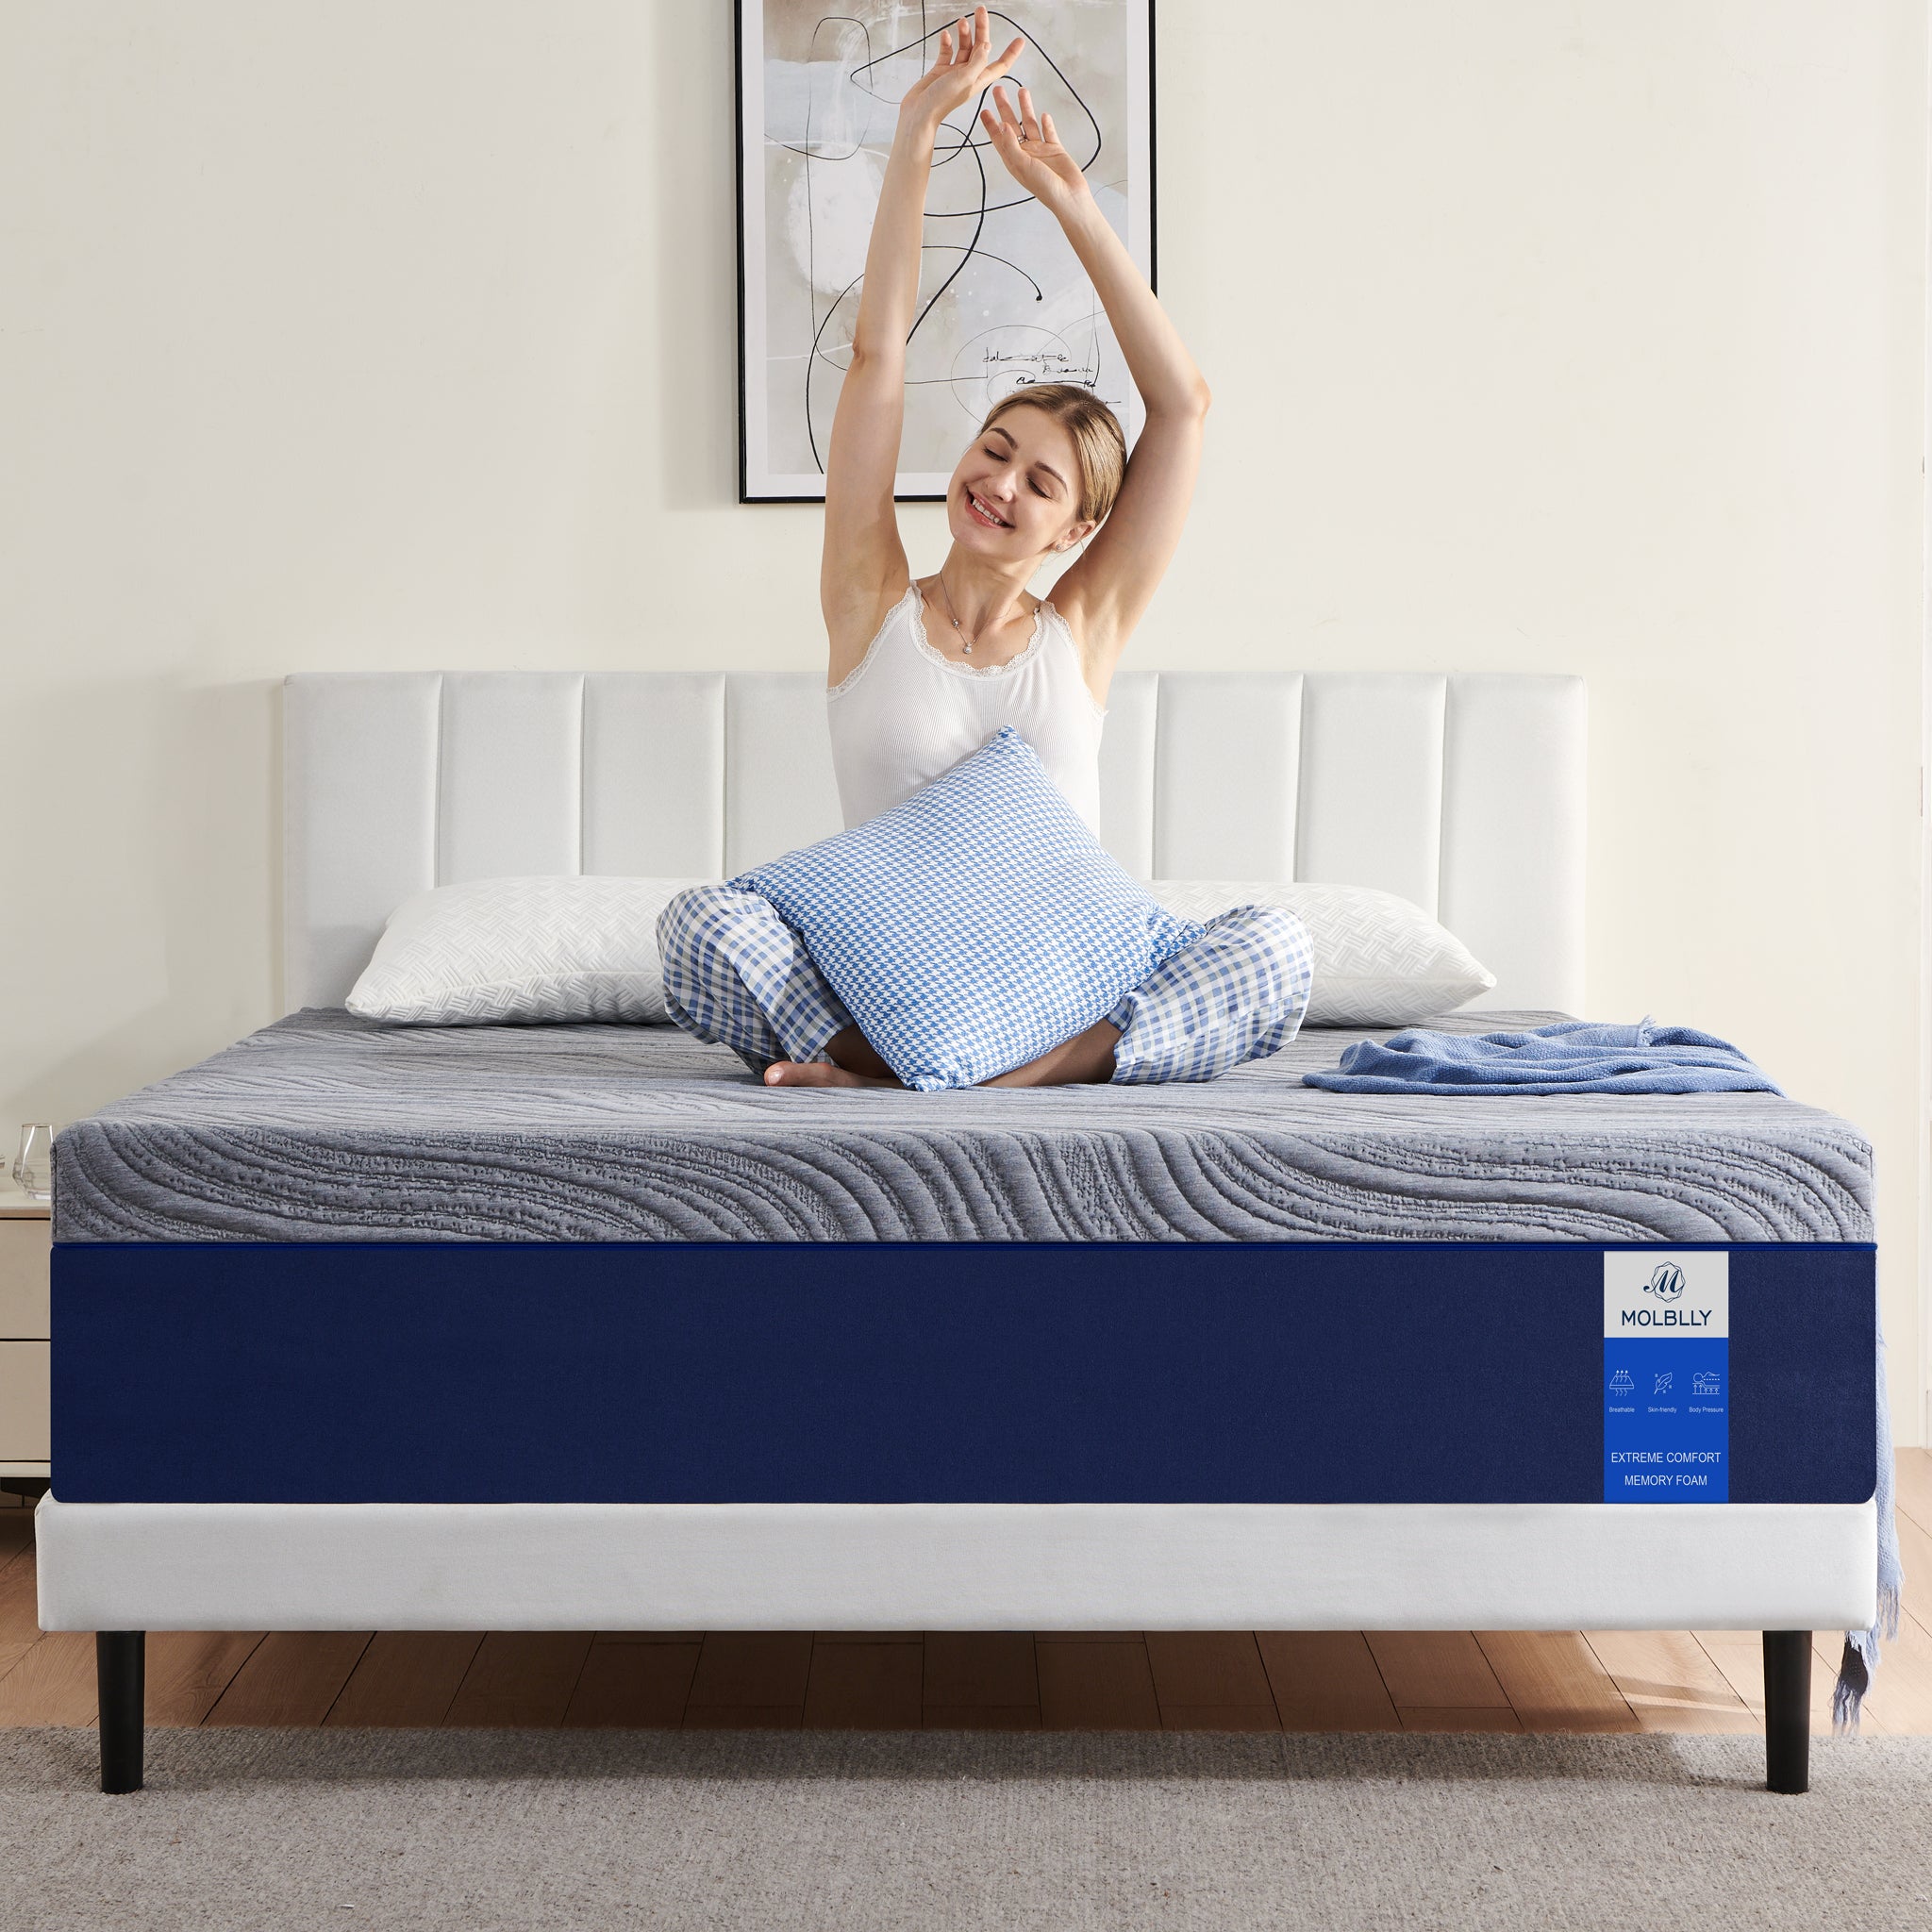 Molblly mattress review: An In-Depth Analysis of Comfort插图4